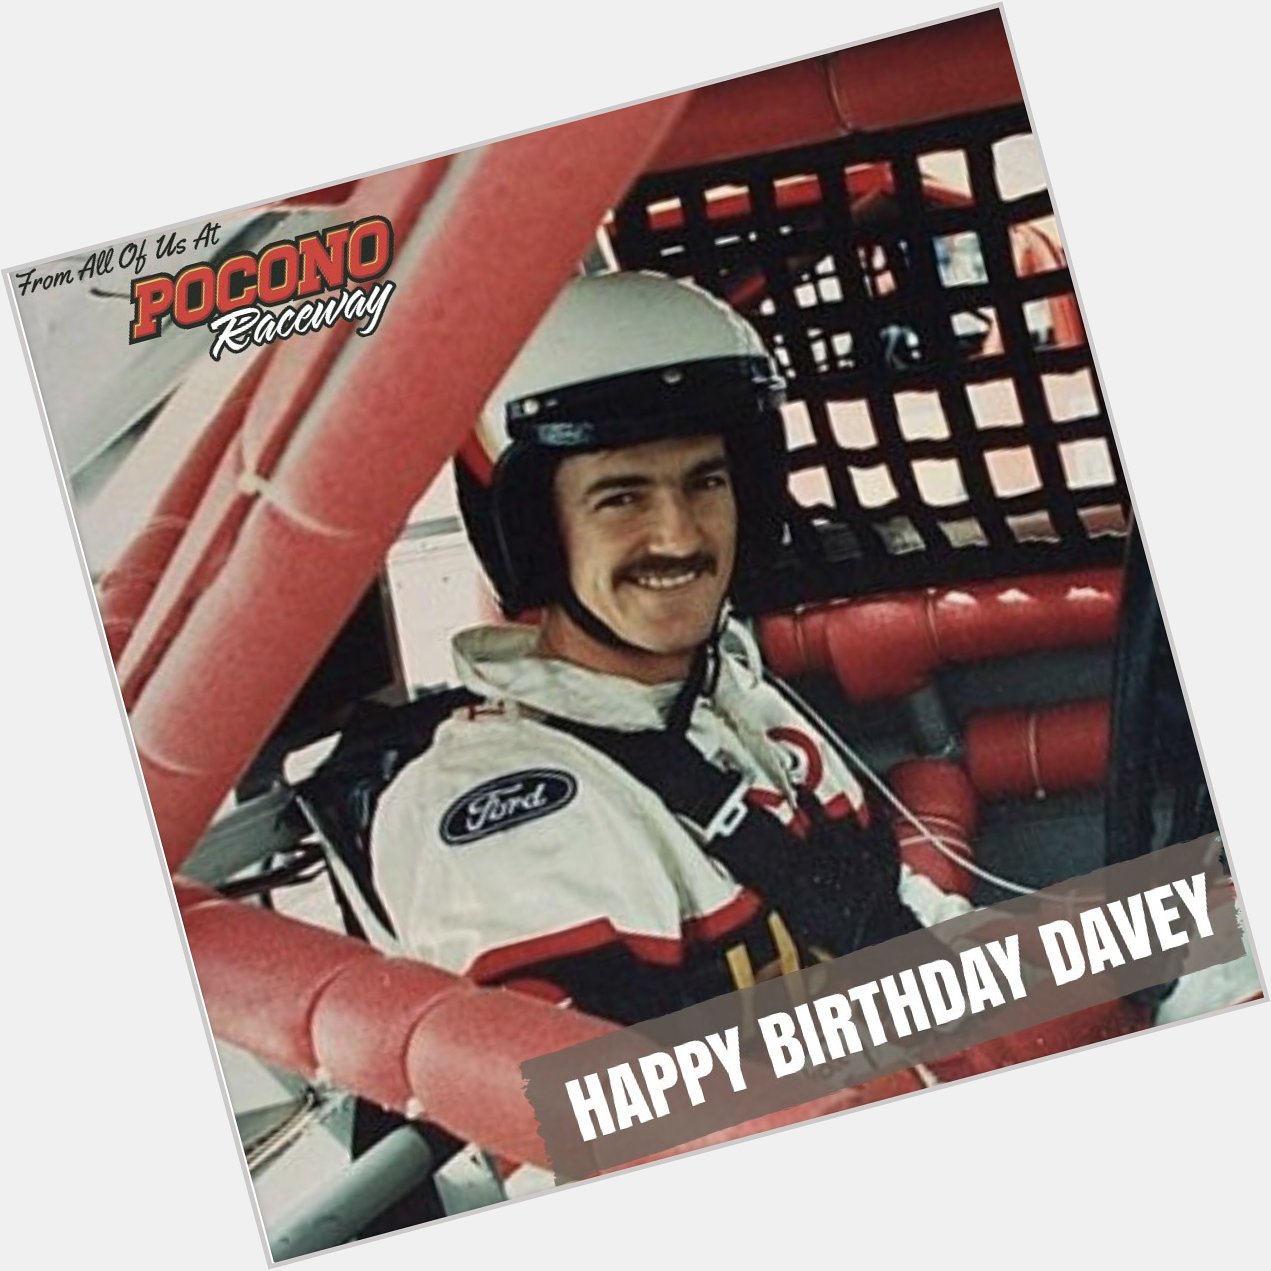 Remessage to help us wish the late Davey Allison a very Happy Birthday  